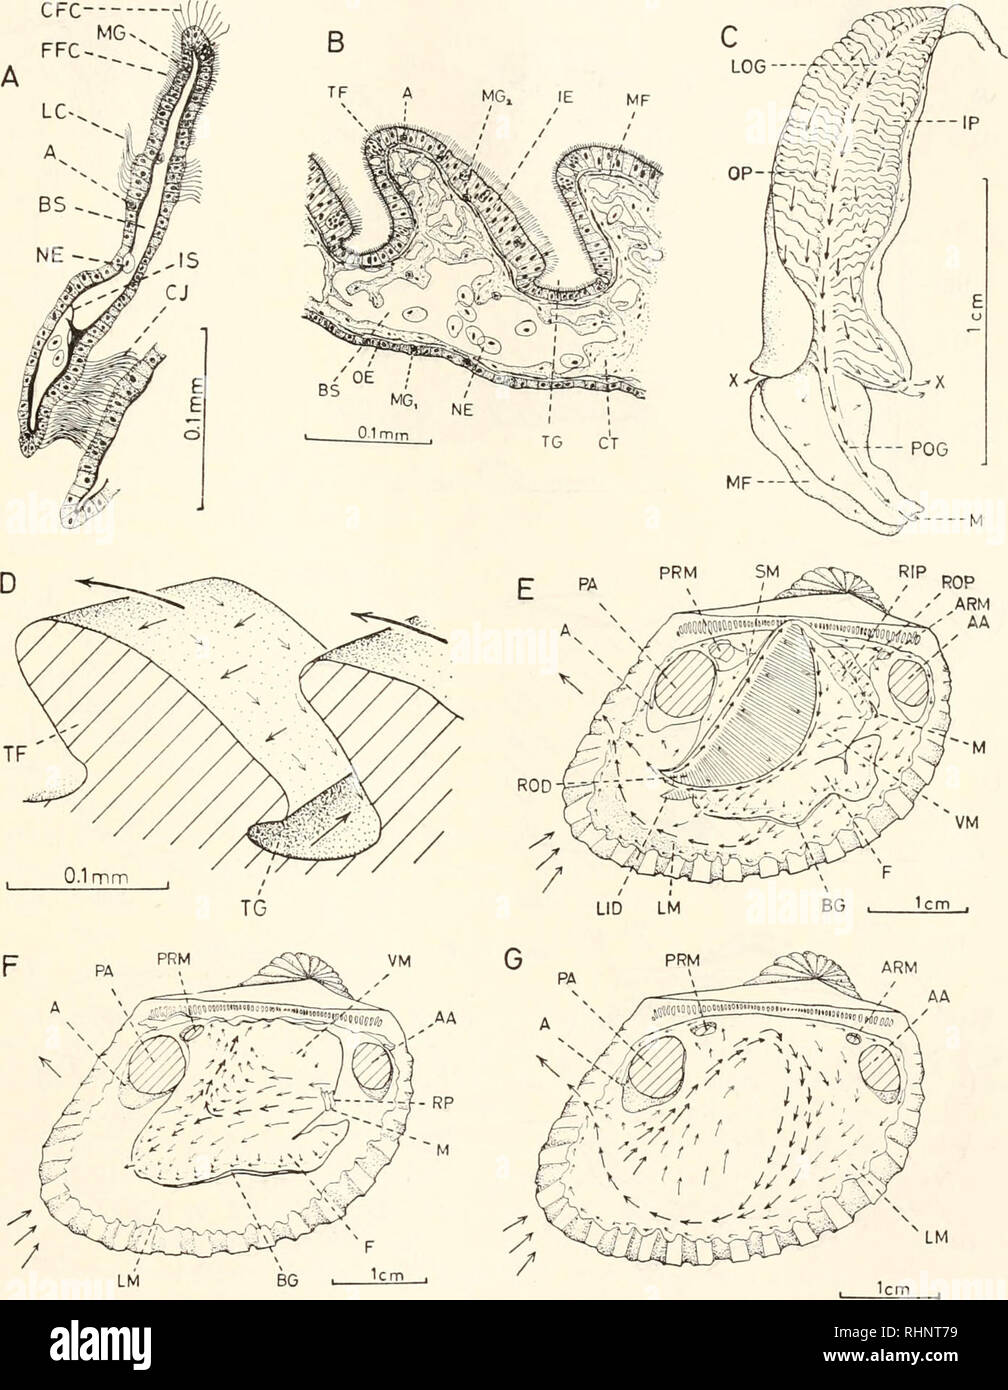 . The Biological bulletin. Biology; Zoology; Biology; Marine Biology. FEEDING MECHANISMS OF ANADARA 111 CFC. LM FIGURE 4. Anadara anomala (Rve.). A. Transverse section of gill filament. B. Trans- verse section through transverse fold of labial palp. C. Ciliary currents of the left labial palp. D. Currents on two adjacent folds of labial palp (diagrammatic). E. Currents on ctenidium and adjacent areas. F. Currents on the foot and visceral mass. G. Currents on the left mantle lobe.. Please note that these images are extracted from scanned page images that may have been digitally enhanced for rea Stock Photo